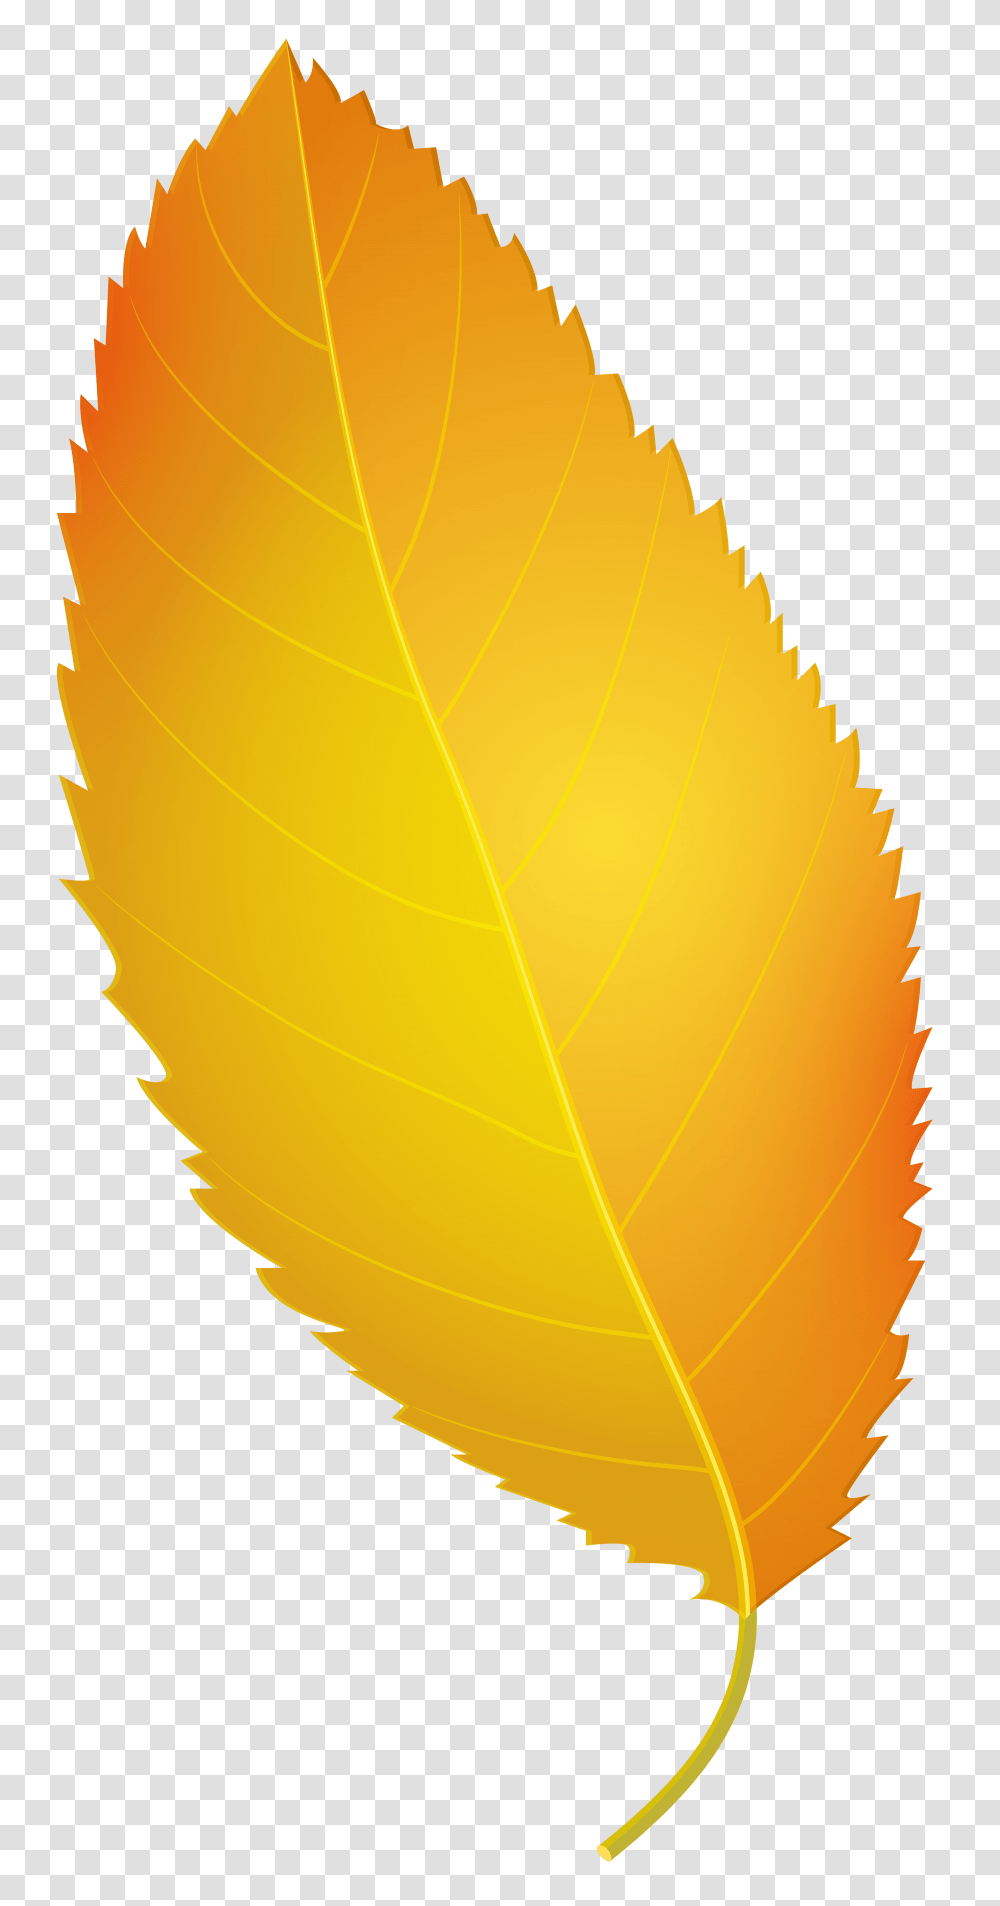 Yellow Autumn Leaf Clip Art Yellow Fall Leaves Clipart, Plant, Veins, Green, Texture Transparent Png